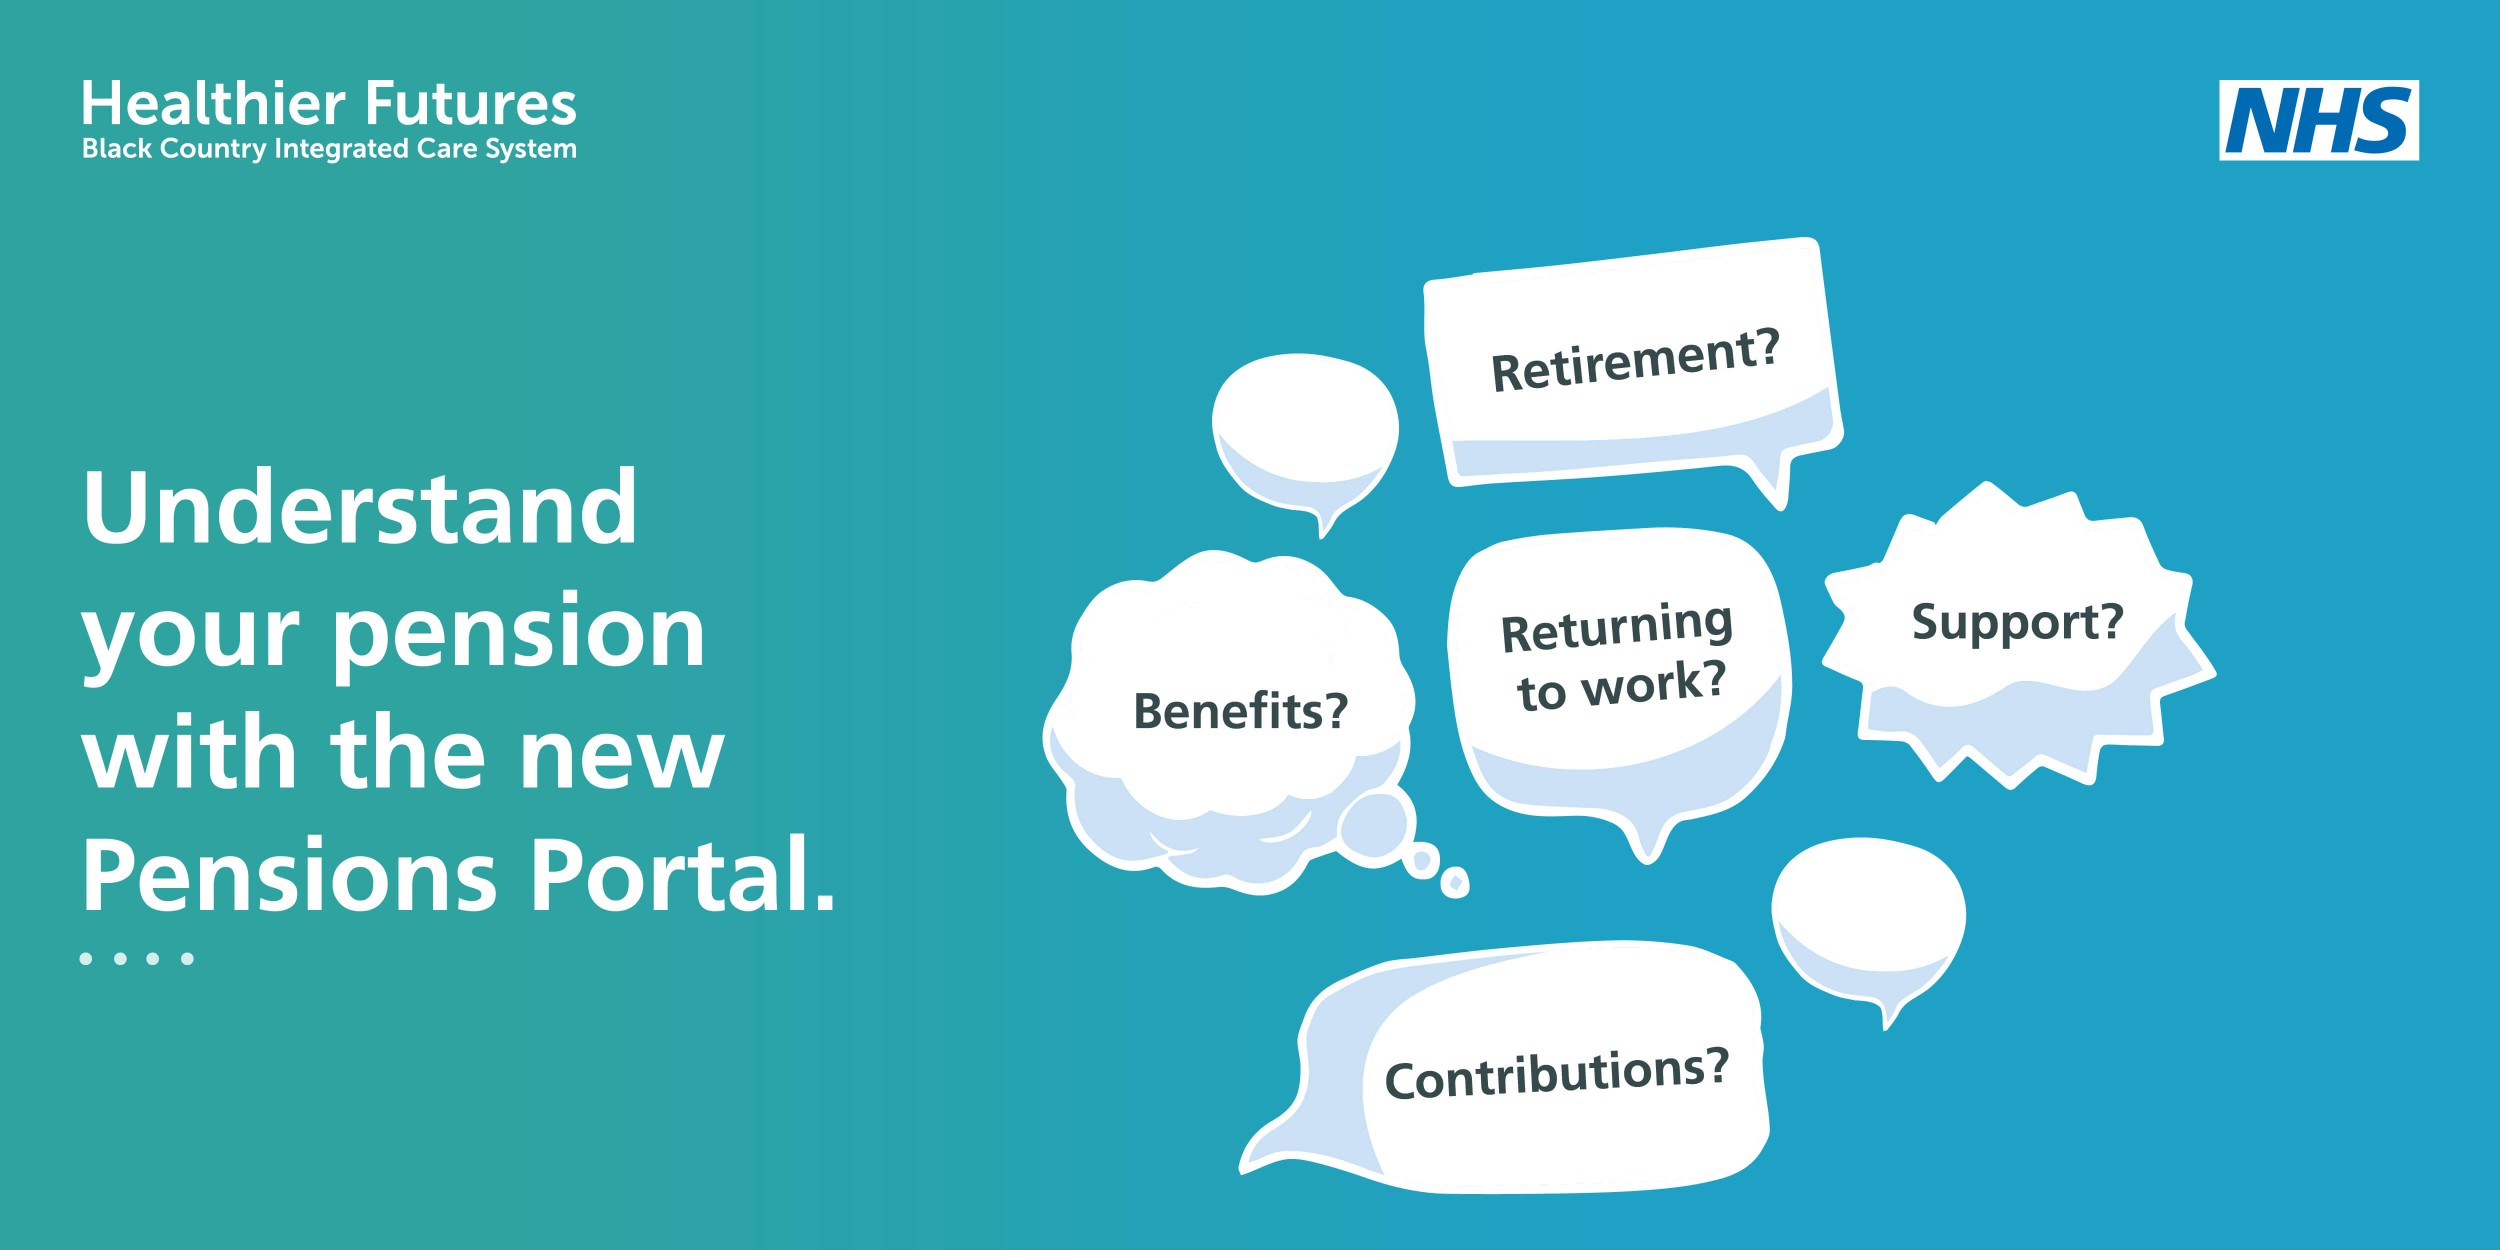 Understand your pension with the new pensions portal